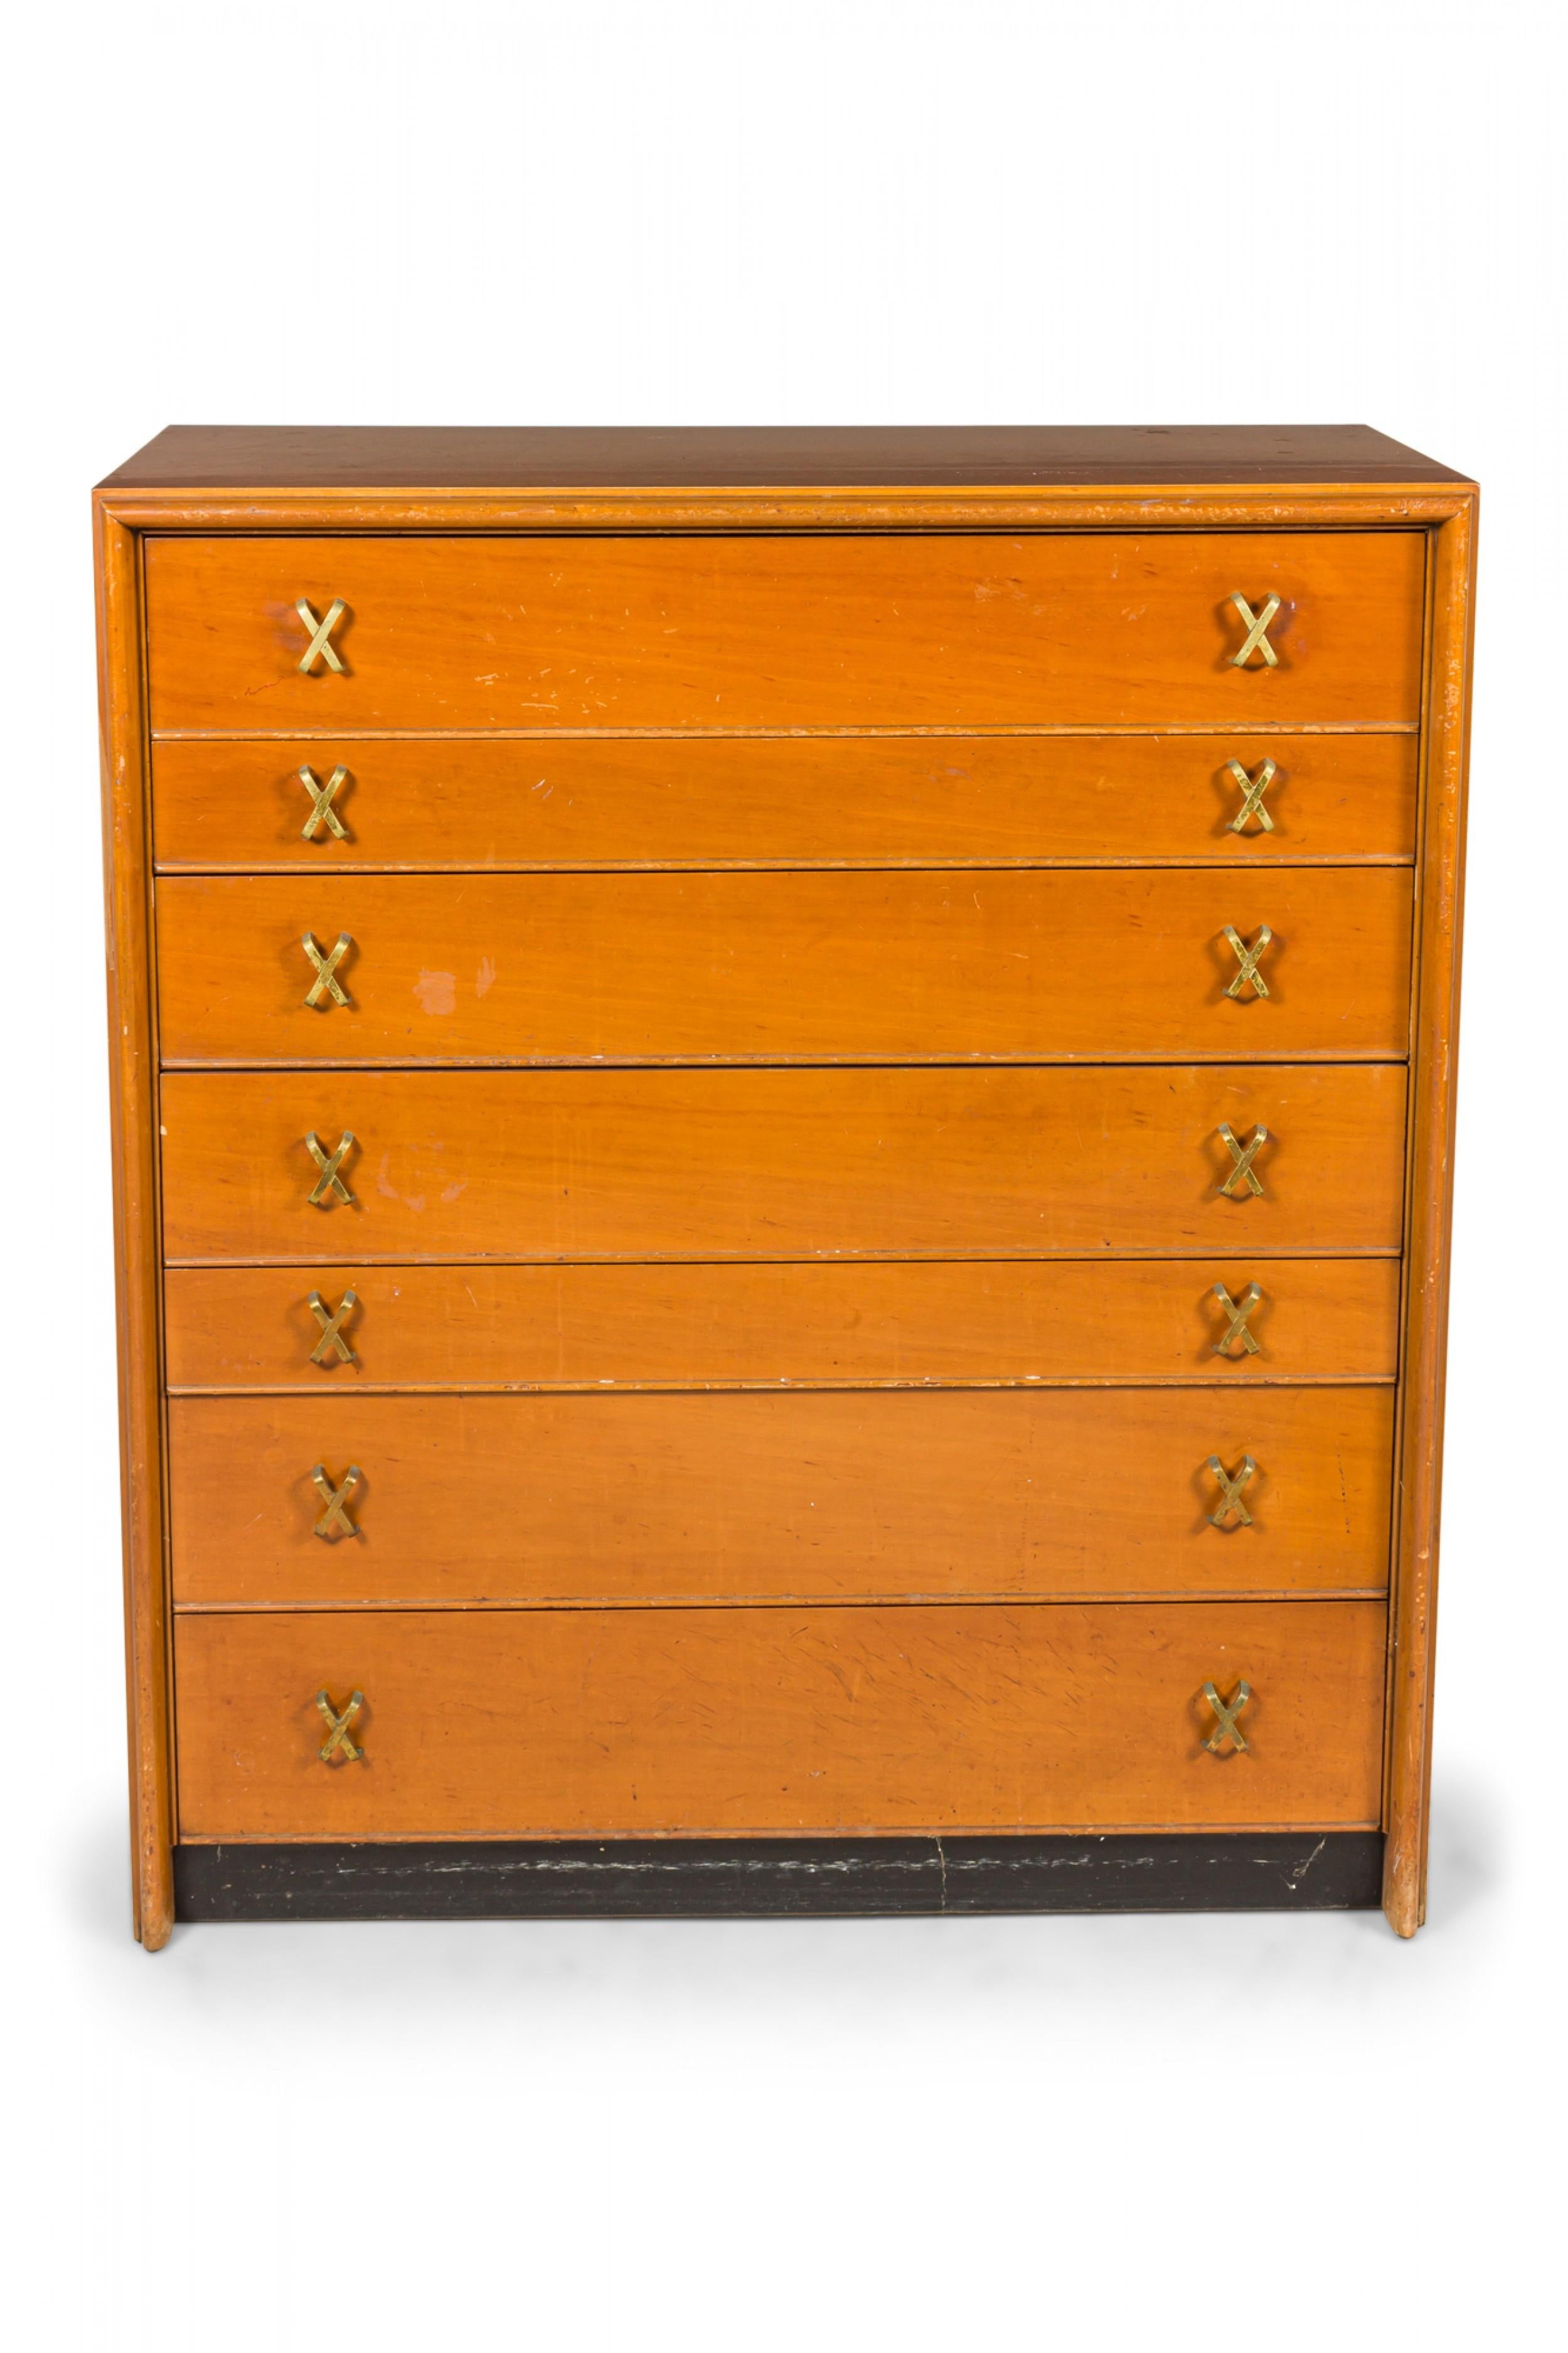 Pair of mid-century walnut high chests / dressers with six drawers mounted with X-shaped brass drawer pulls. (Paul Frankl For Johnson Furniture Co)(priced as pair).